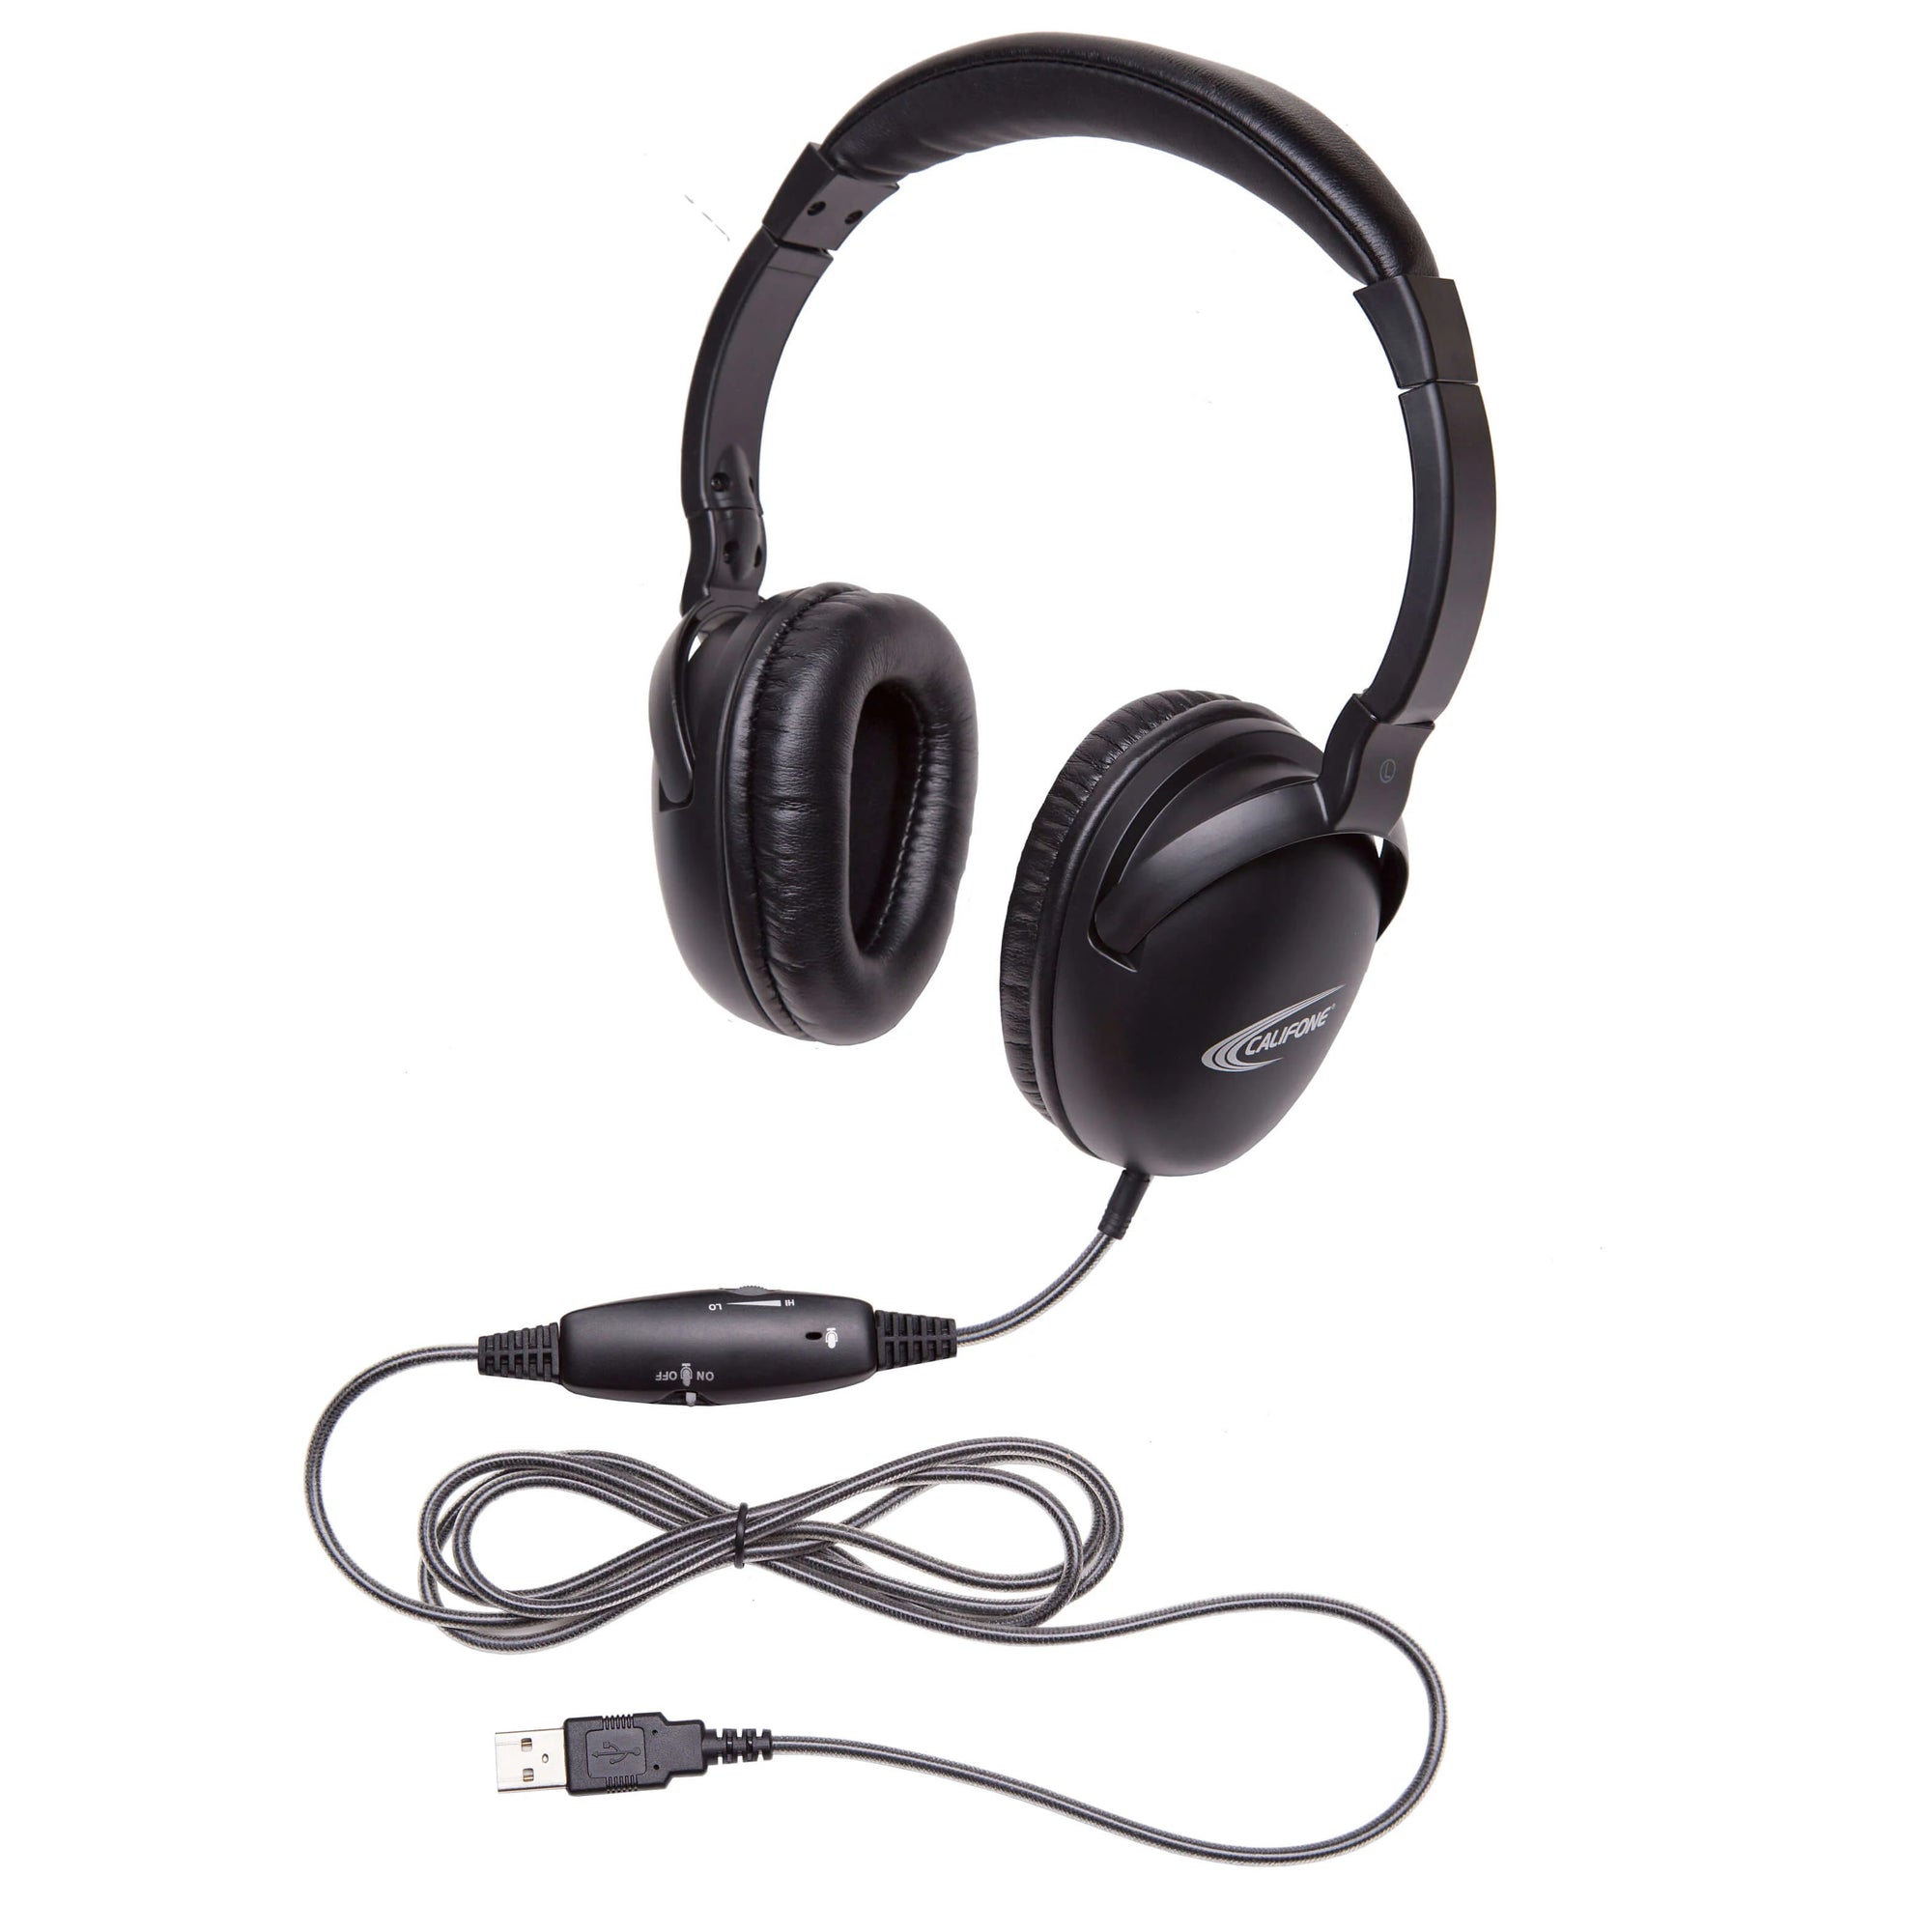 Learning Headphones offers a complete range of in-line mics and school headsets, perfect for use in the classroom.